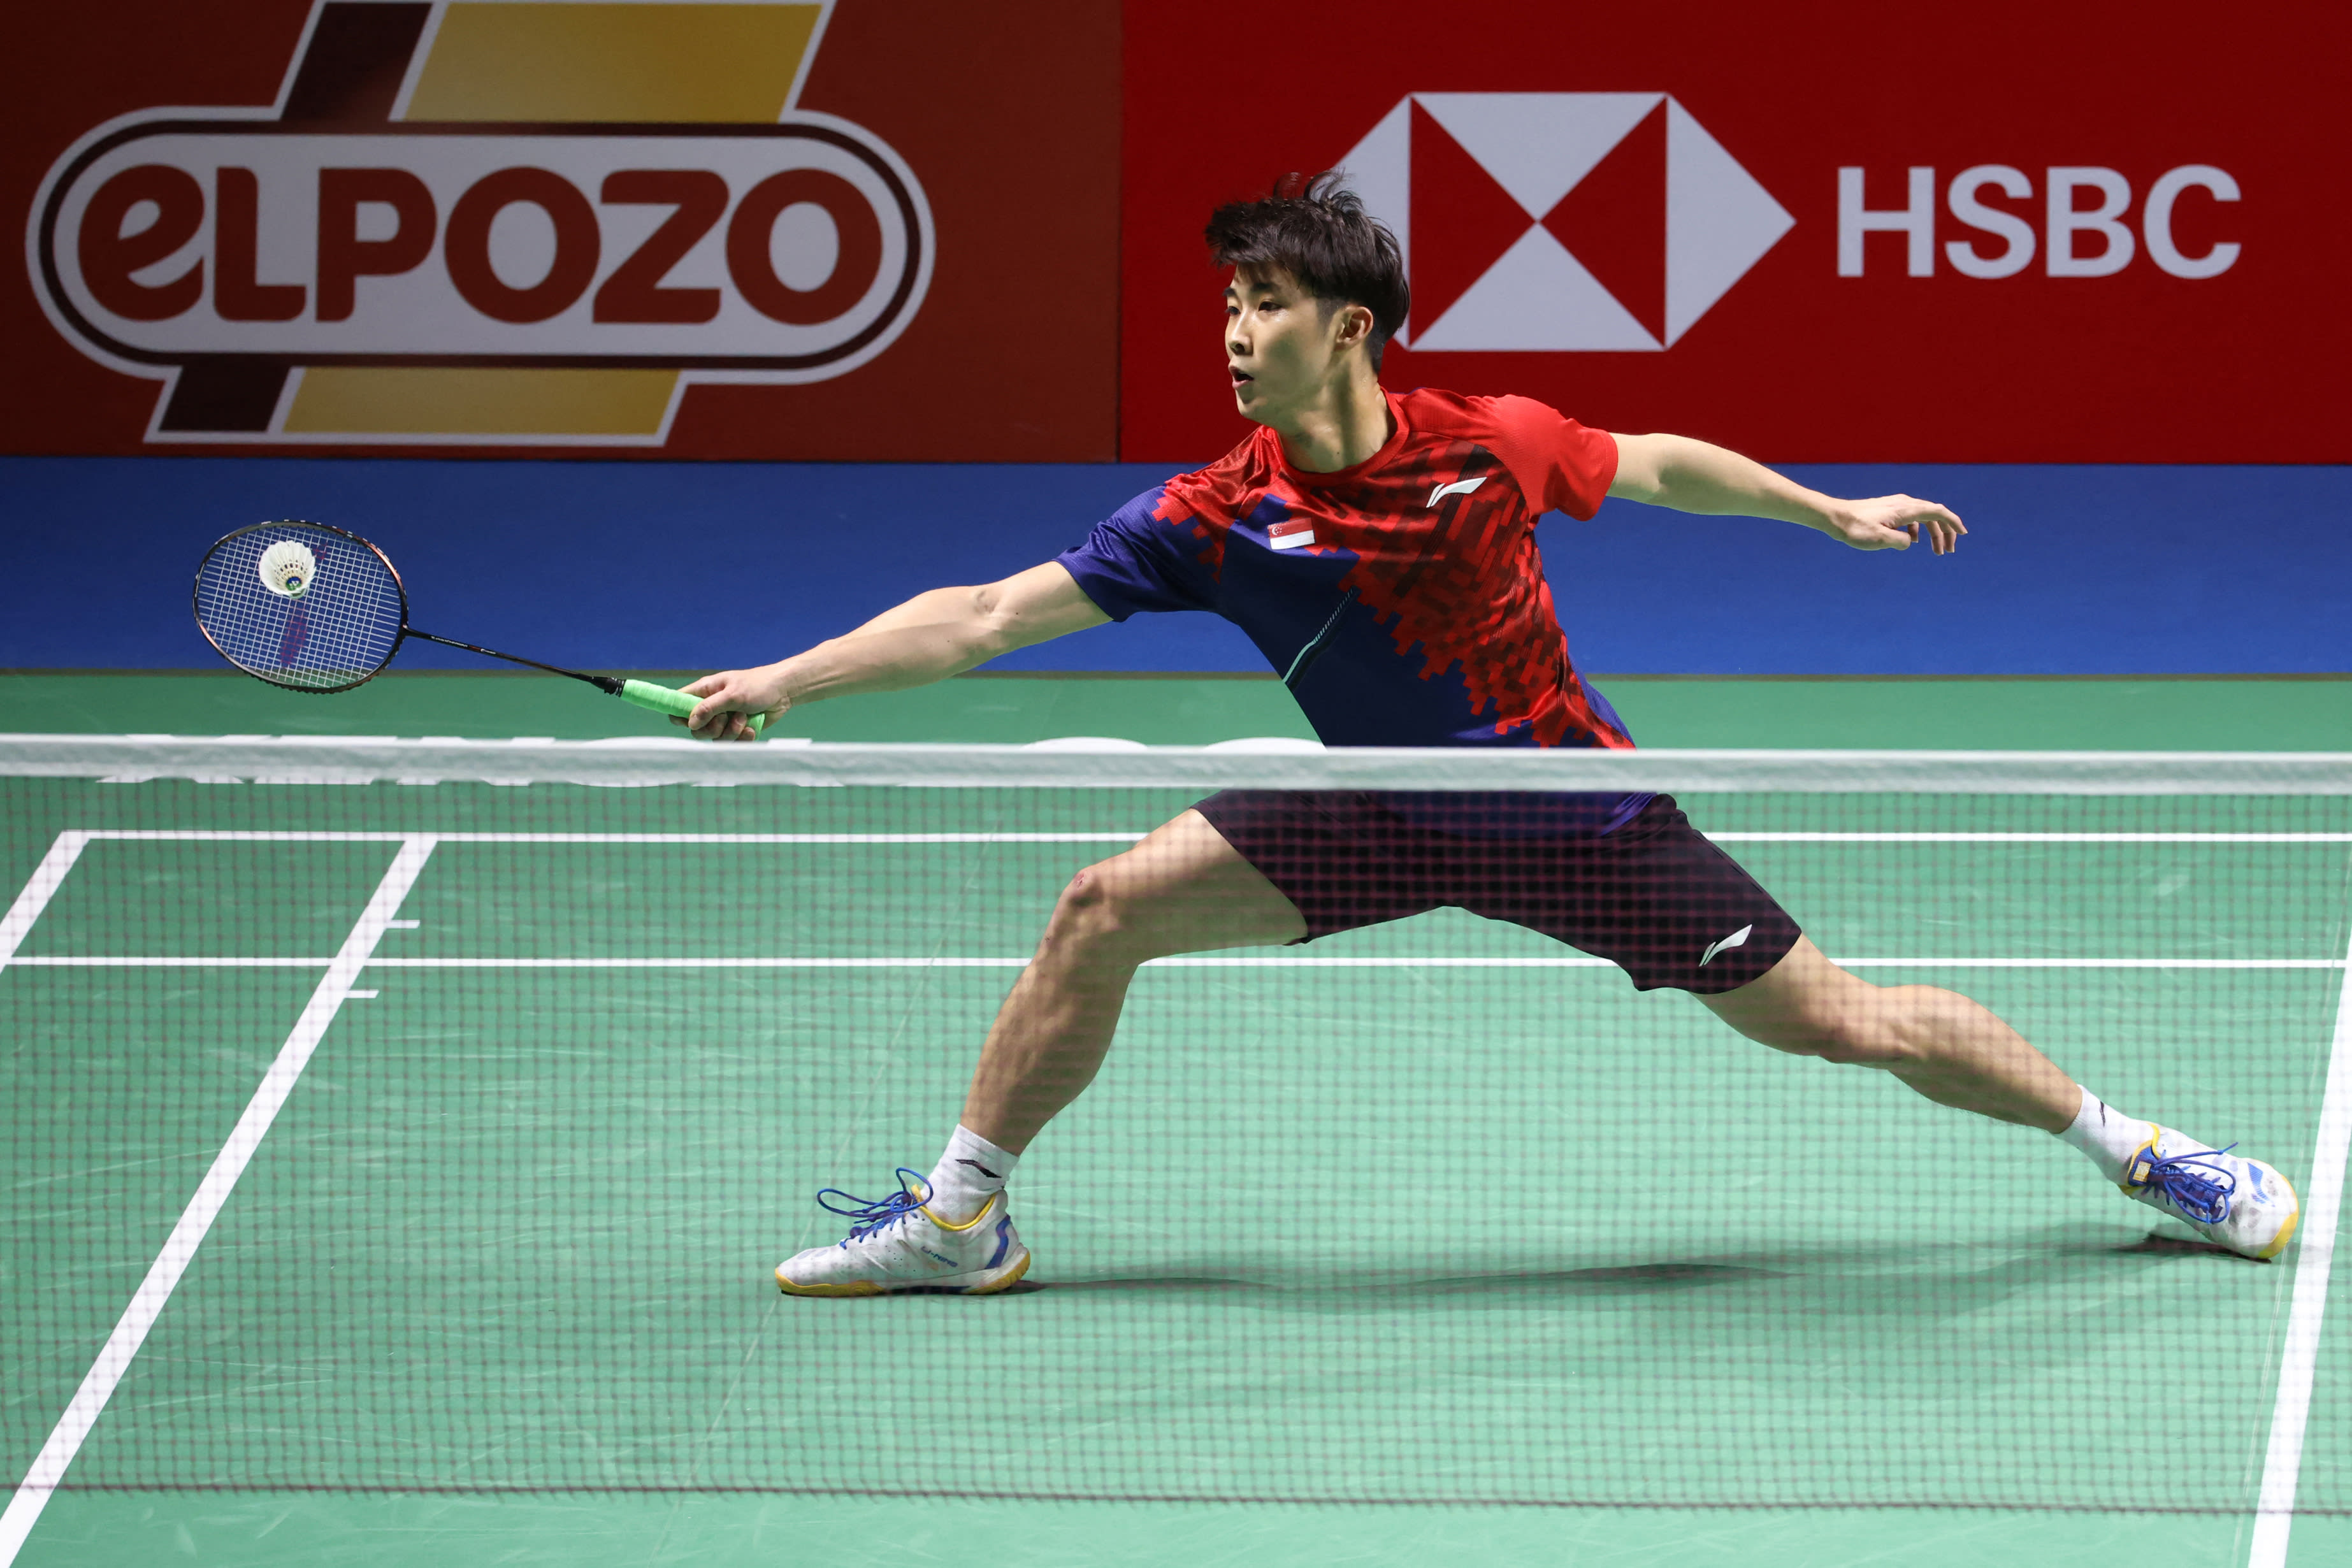 Loh Kean Yew at the men's singles final badminton match of the Badminton World Federation's World Championships in Spain on Dec 19, 2021, after nursing an ankle injury.